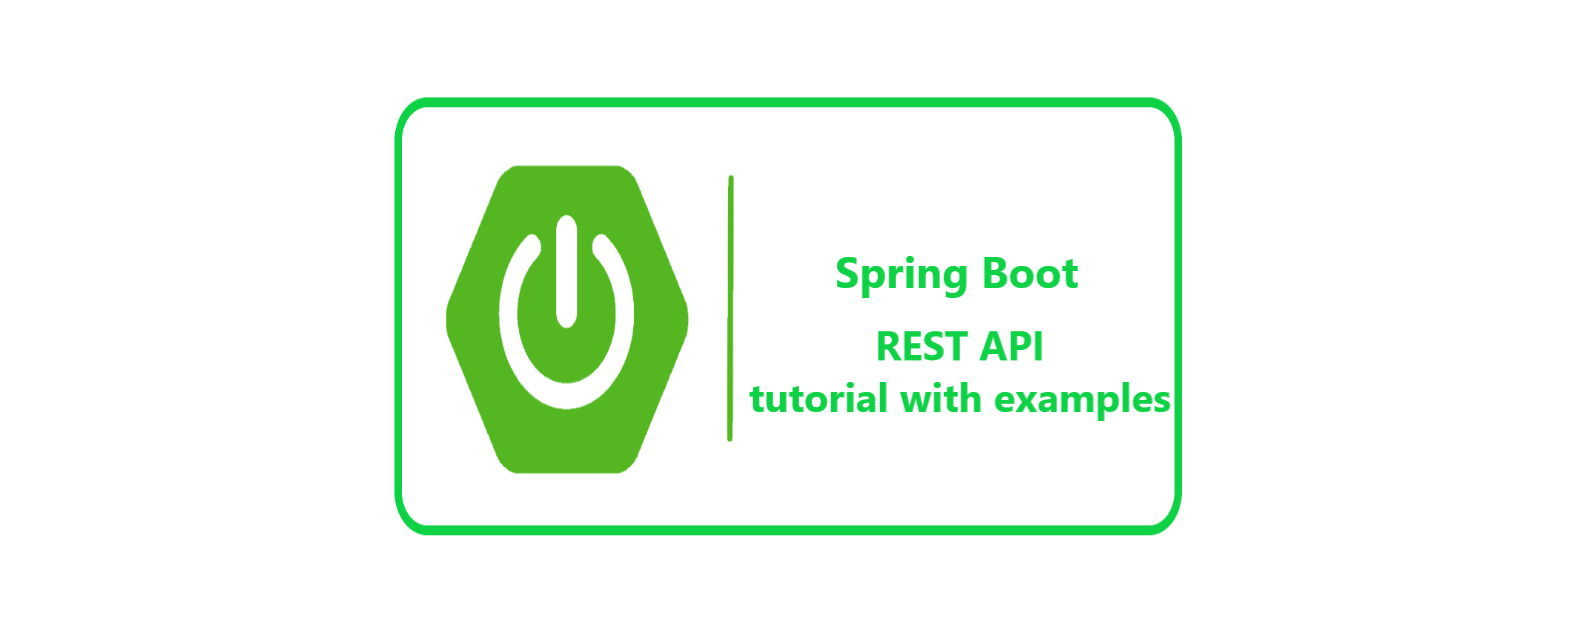 Spring Boot REST API tutorial with examples